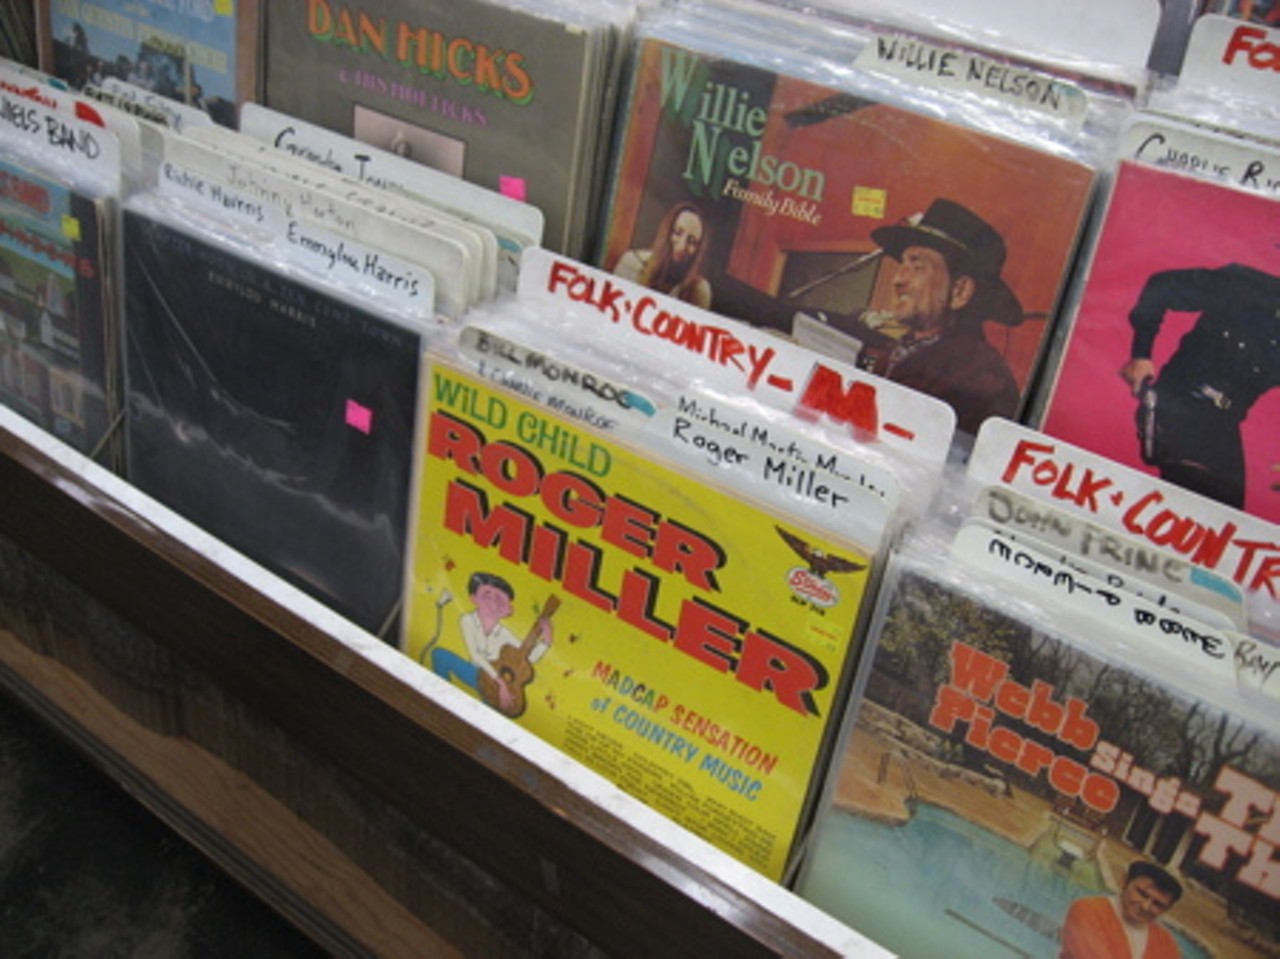 Vinyl hunters were looking for gems among the stacks on Saturday.